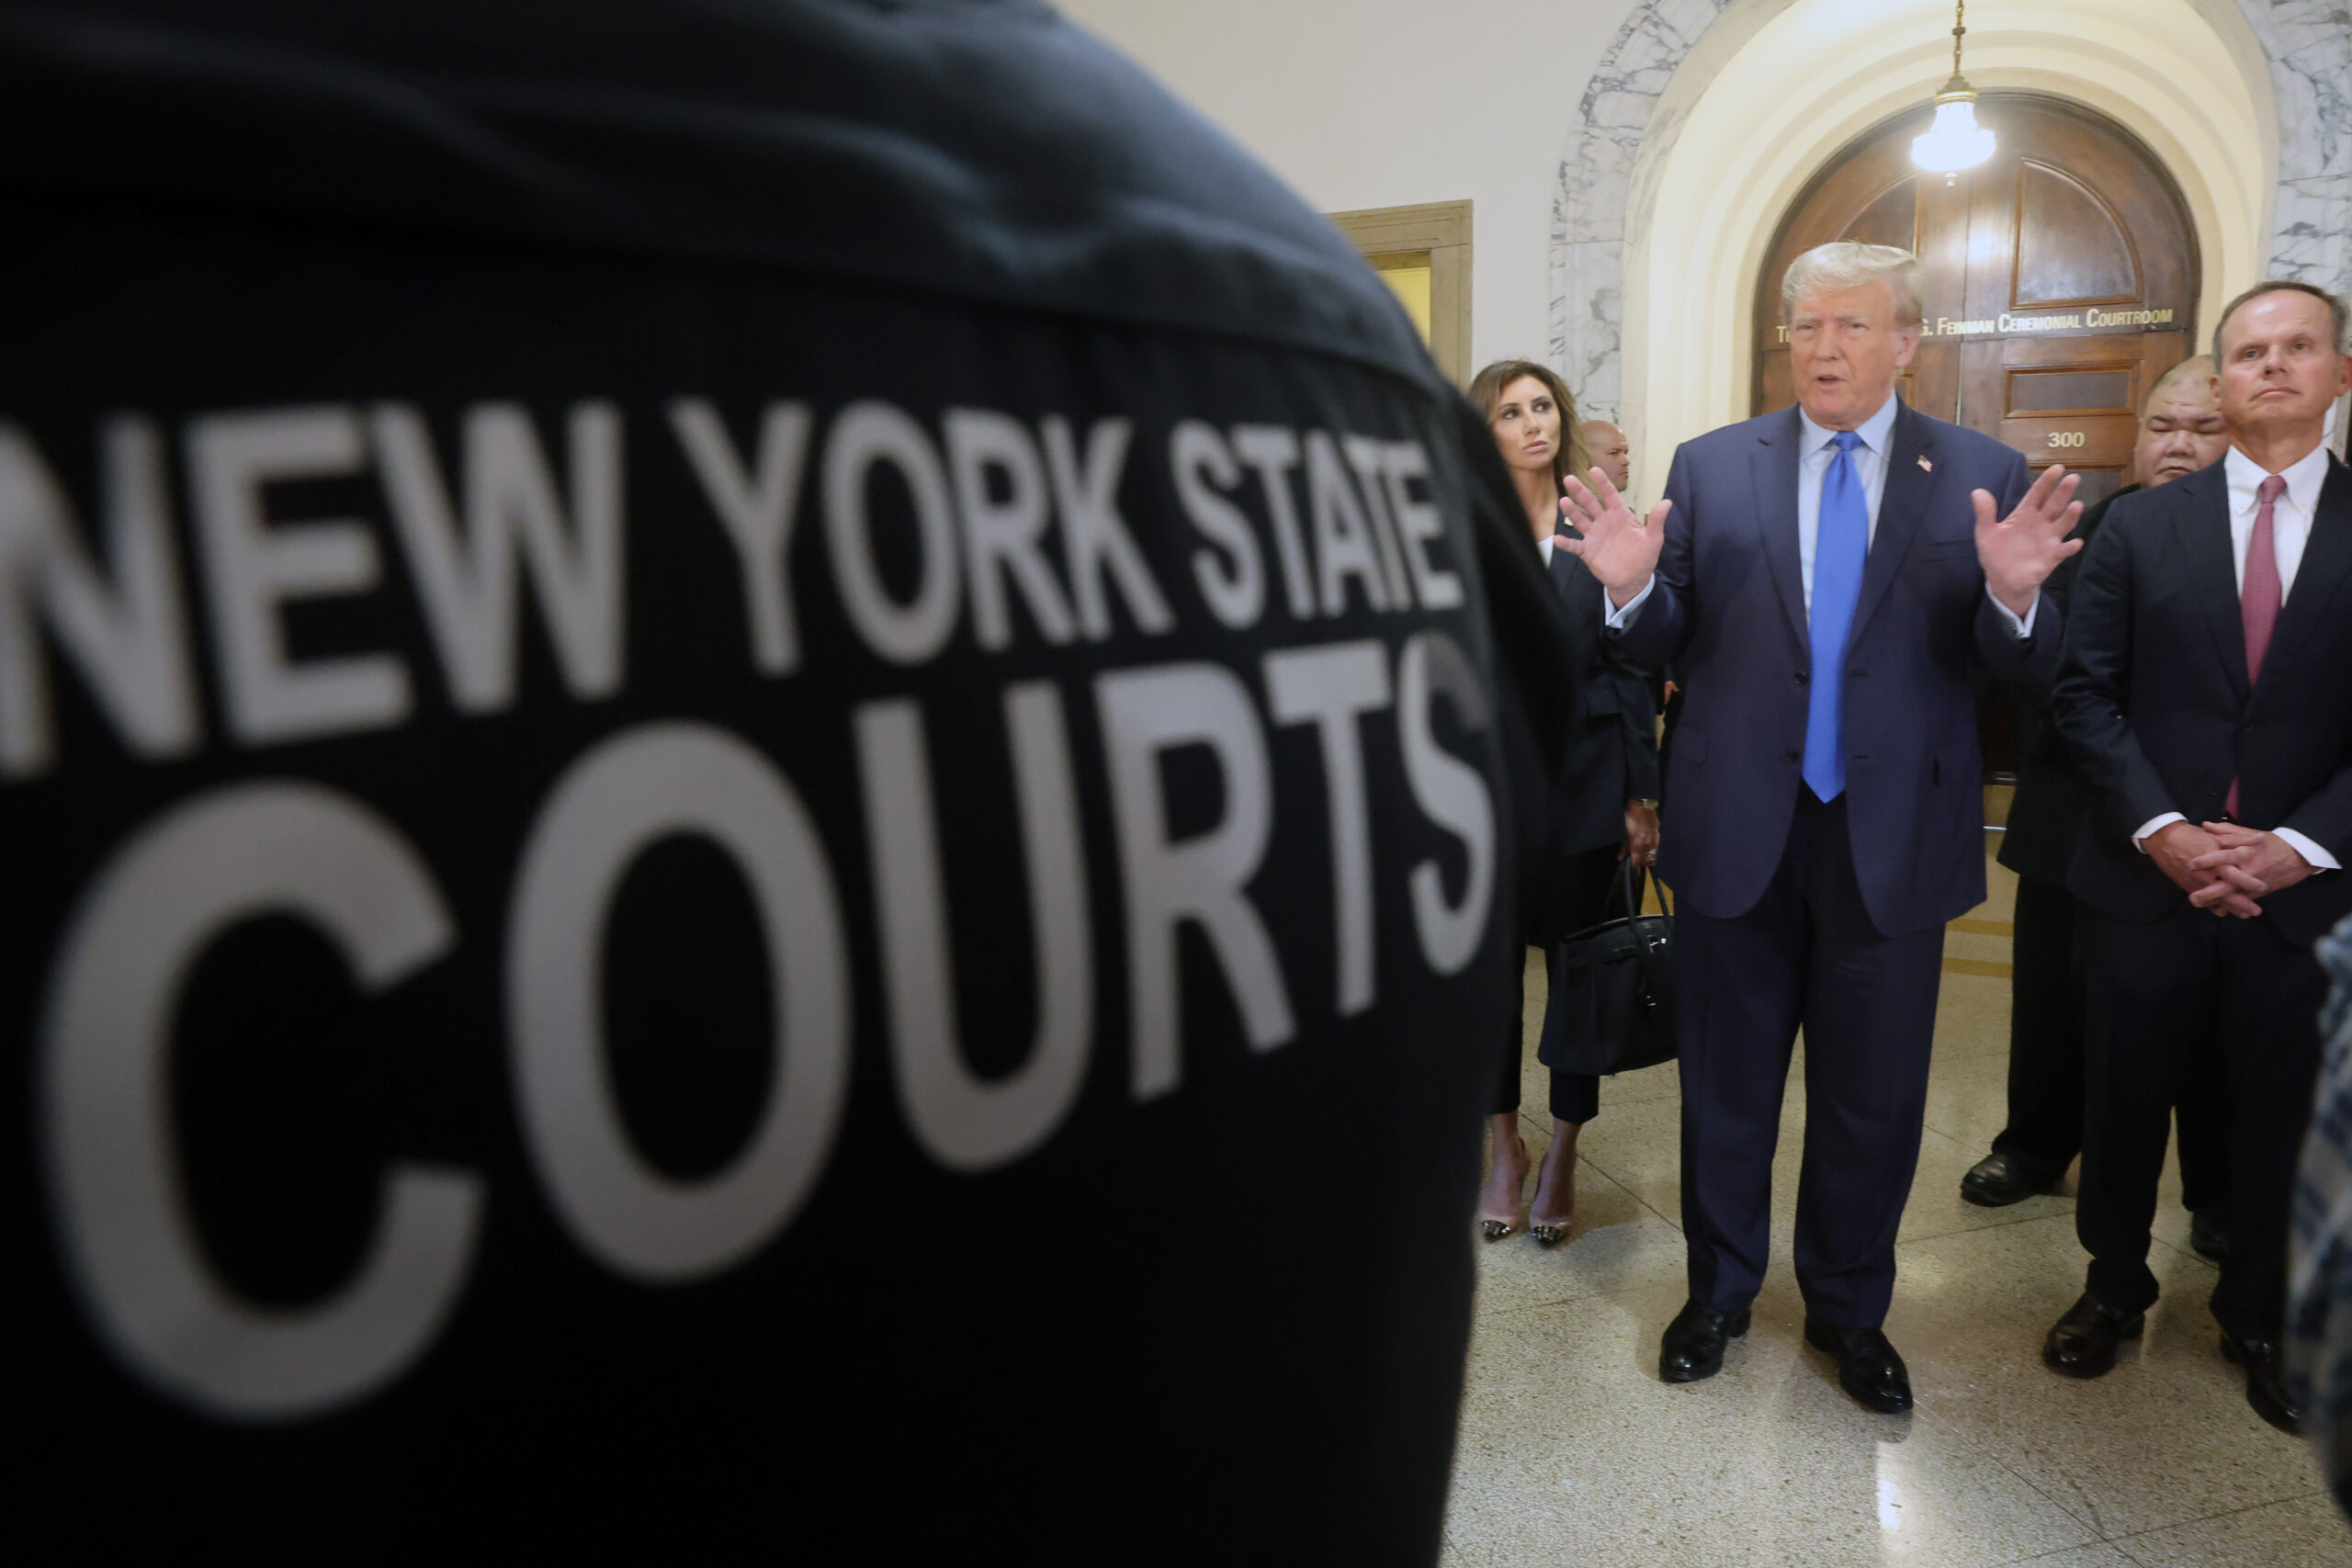 New York Judge Caught Smiling During Trump Trial Is Lifelong Democrat Donor